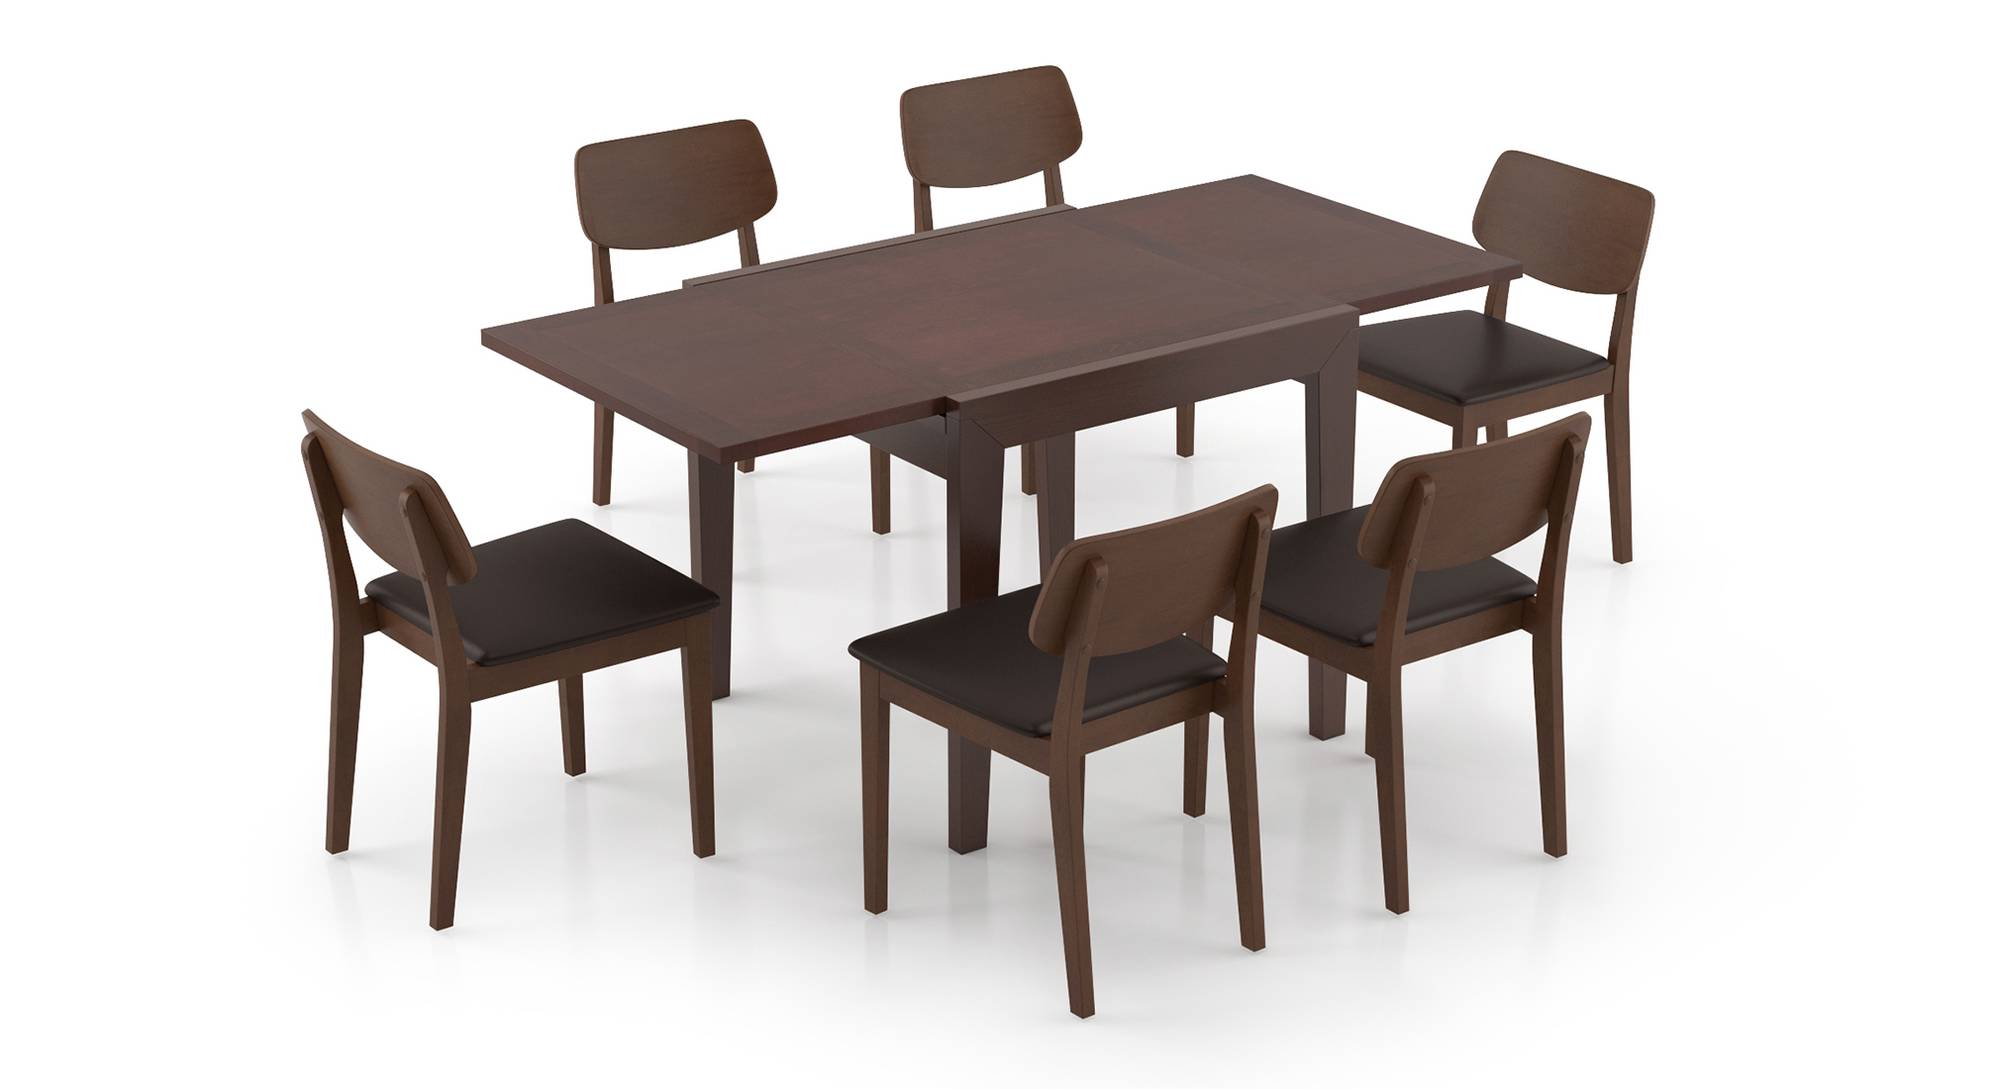 Lawson 6 Seater Dining Table Set, Extendable Dining Room Table And Chairs